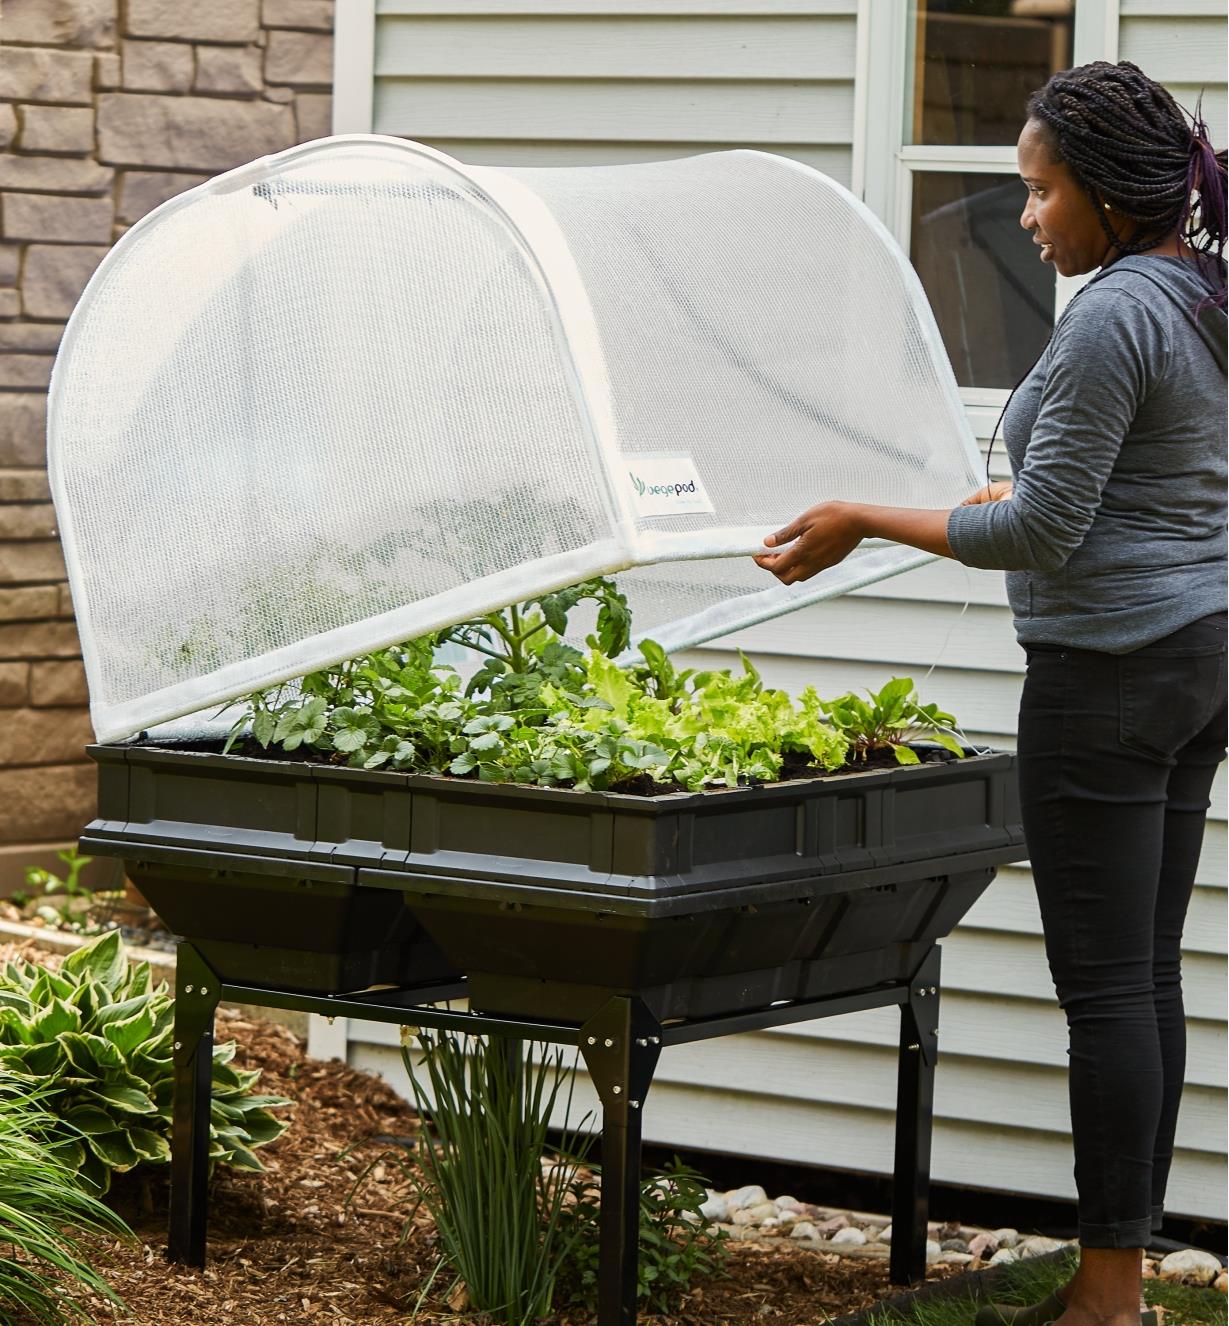 A woman lowers the cover onto a Vegepod container garden filled with growing plants